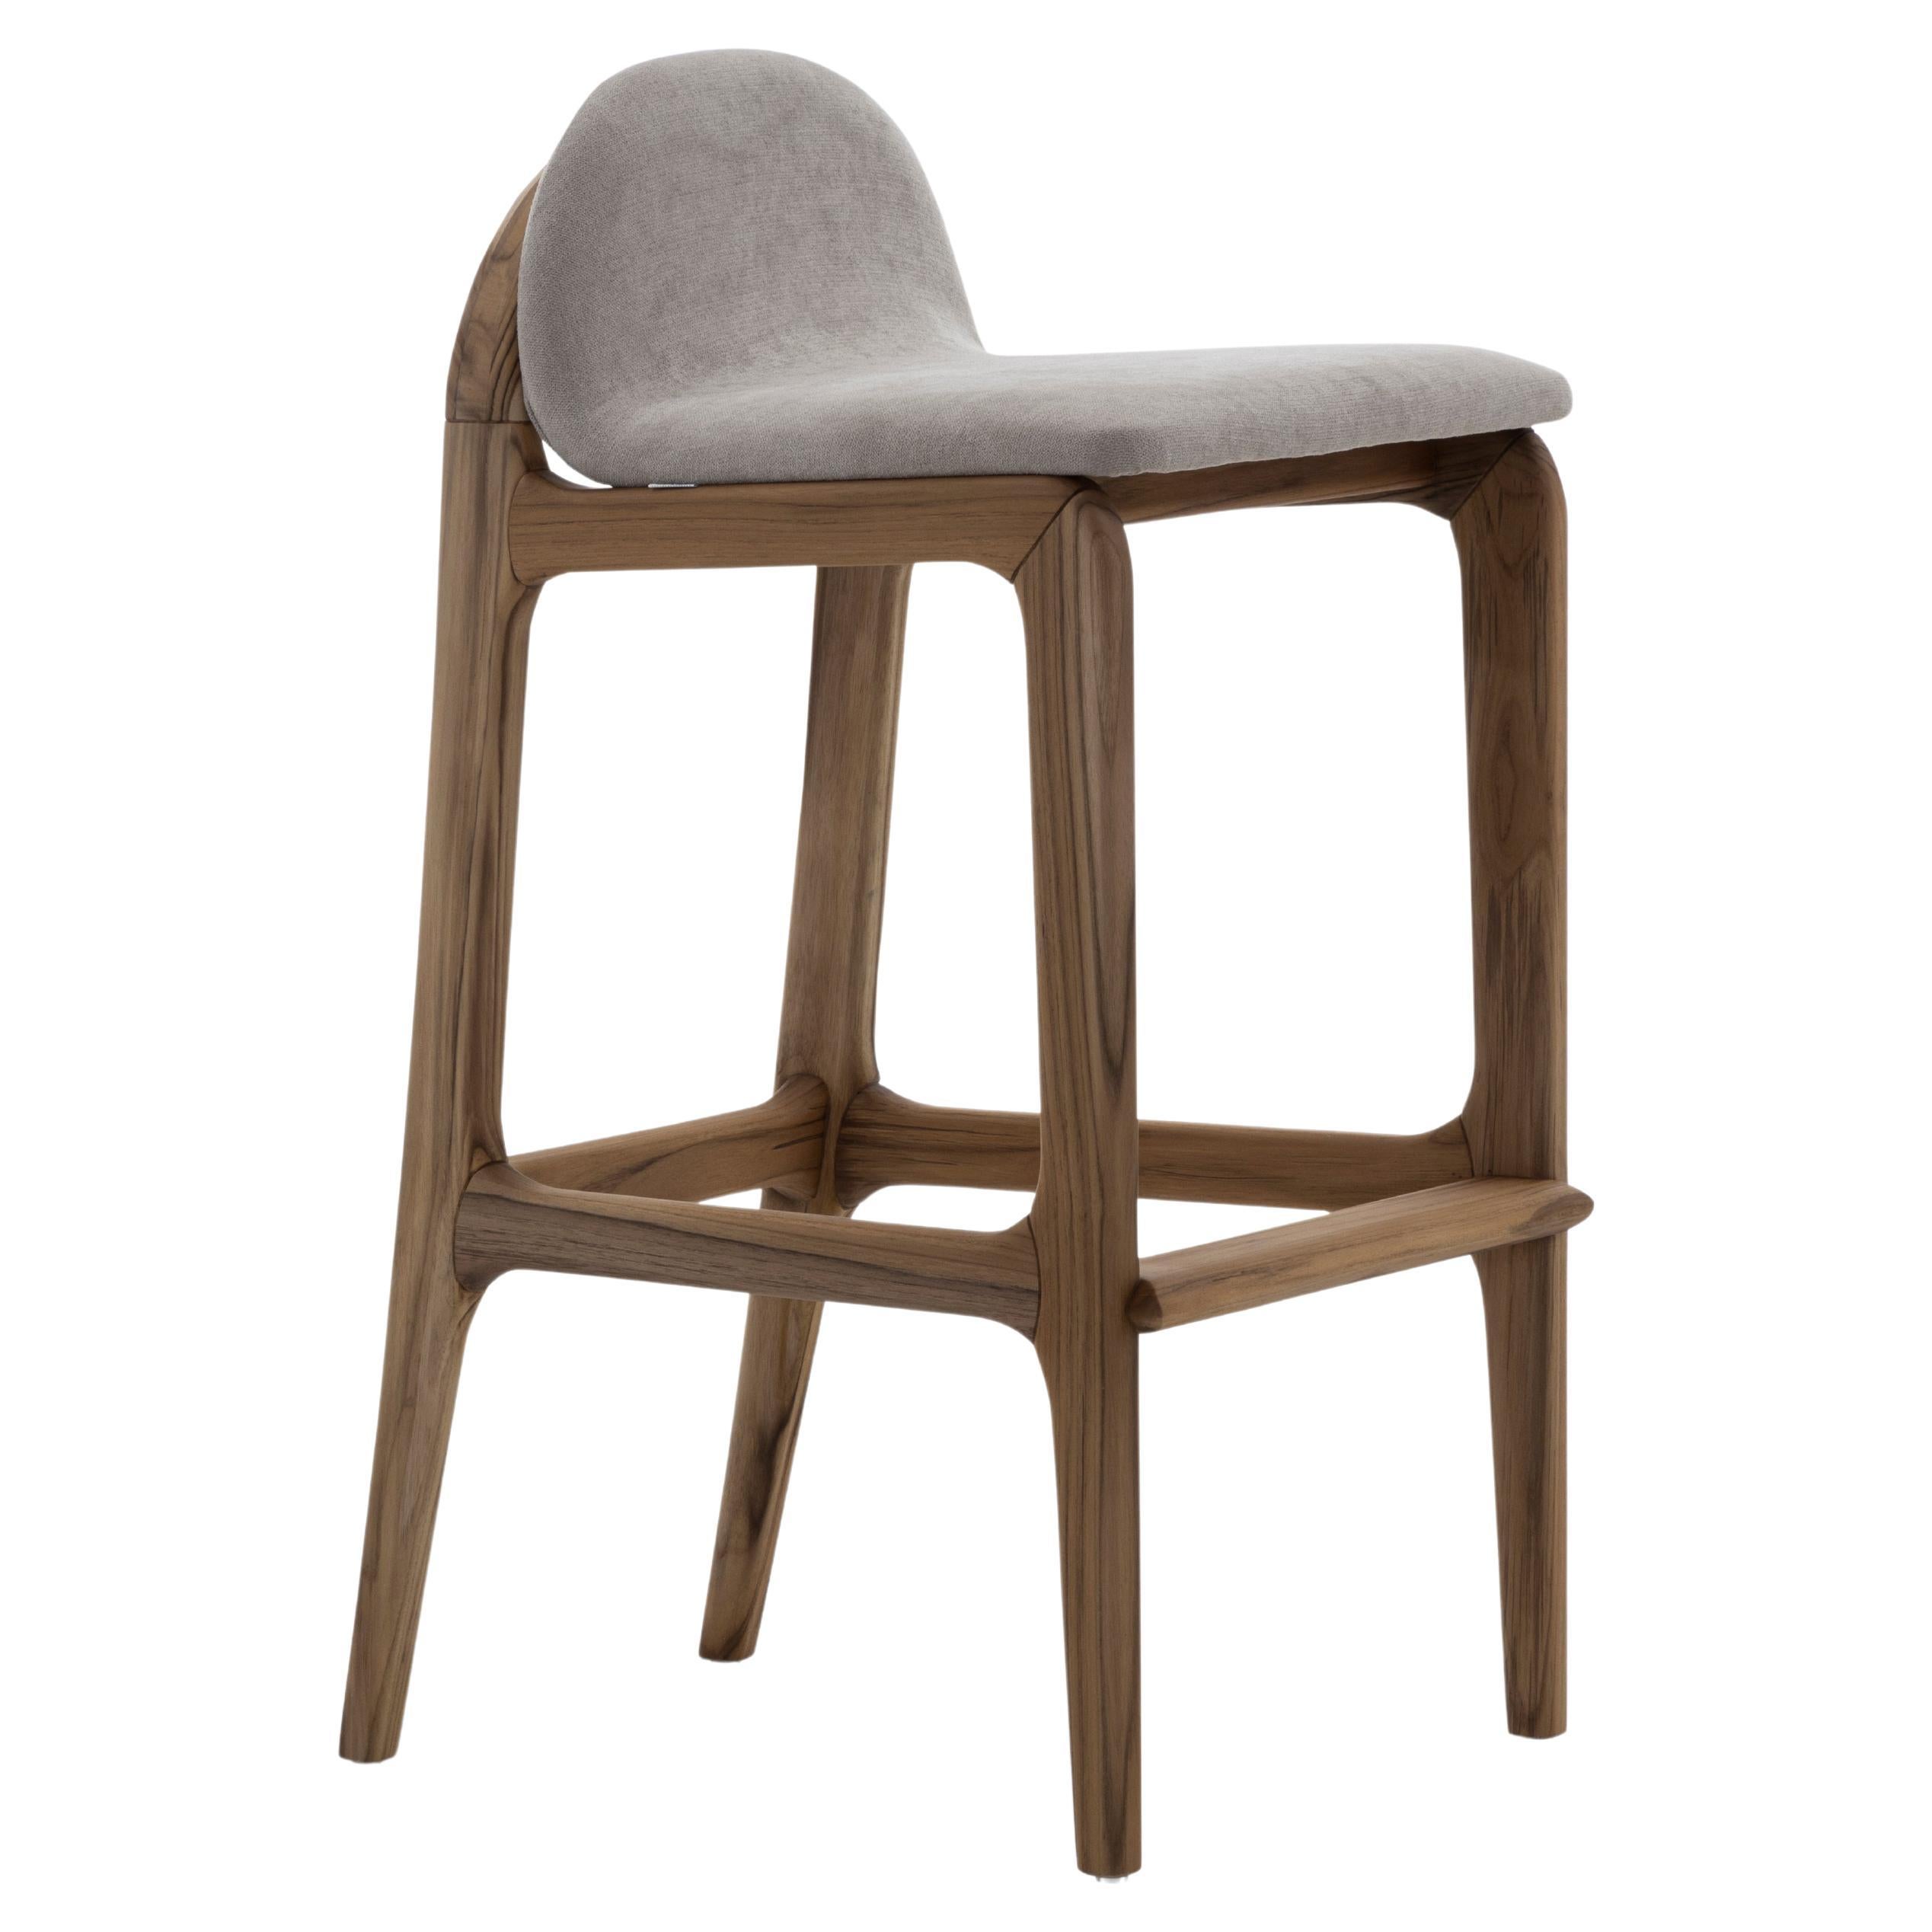 Ura Counter Stool in Teak Wood Finish Base and Upholstered Light Grey Seat For Sale